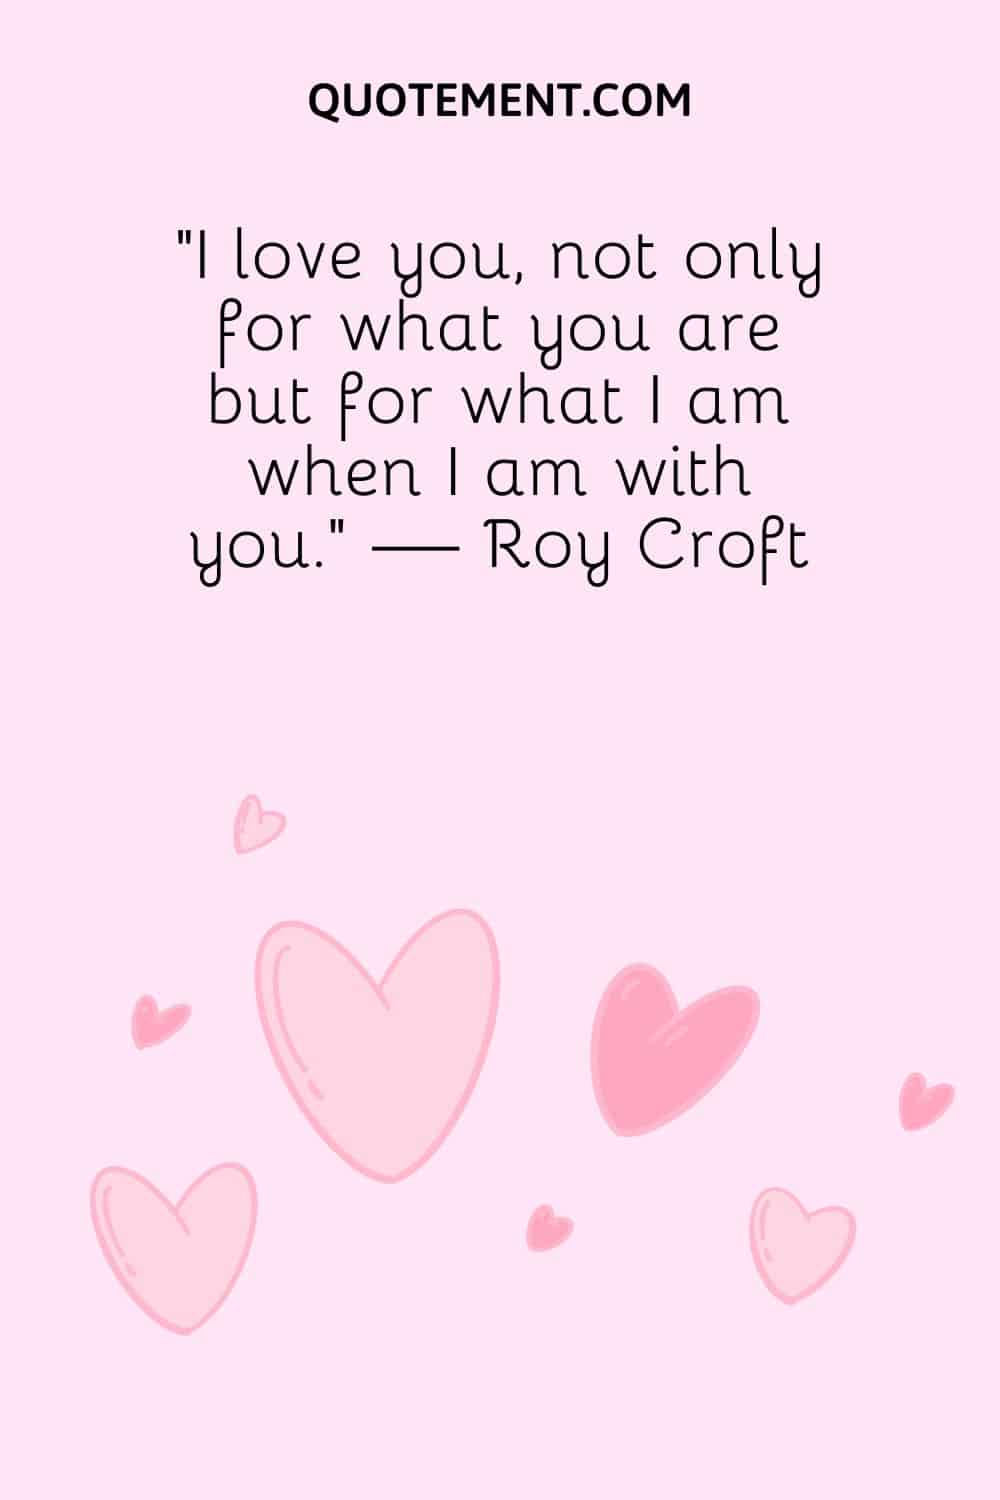 “I love you, not only for what you are but for what I am when I am with you.” — Roy Croft